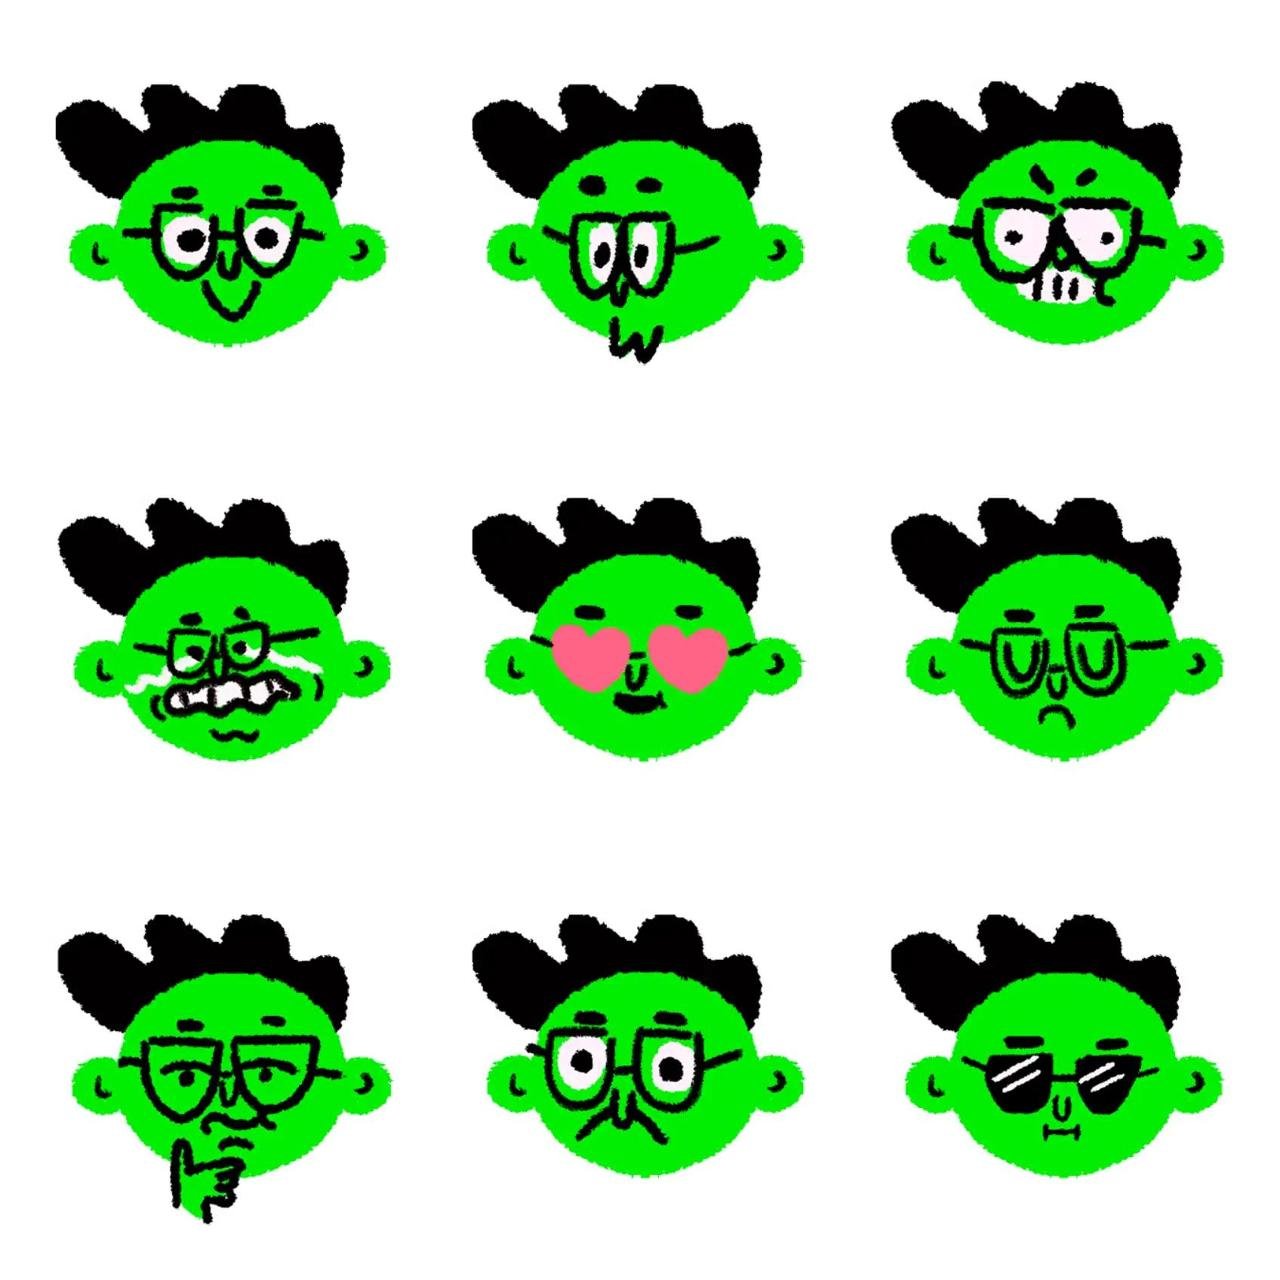 Gonchi Animation/Cartoon,Gag sticker pack for Whatsapp, Telegram, Signal, and others chatting and message apps